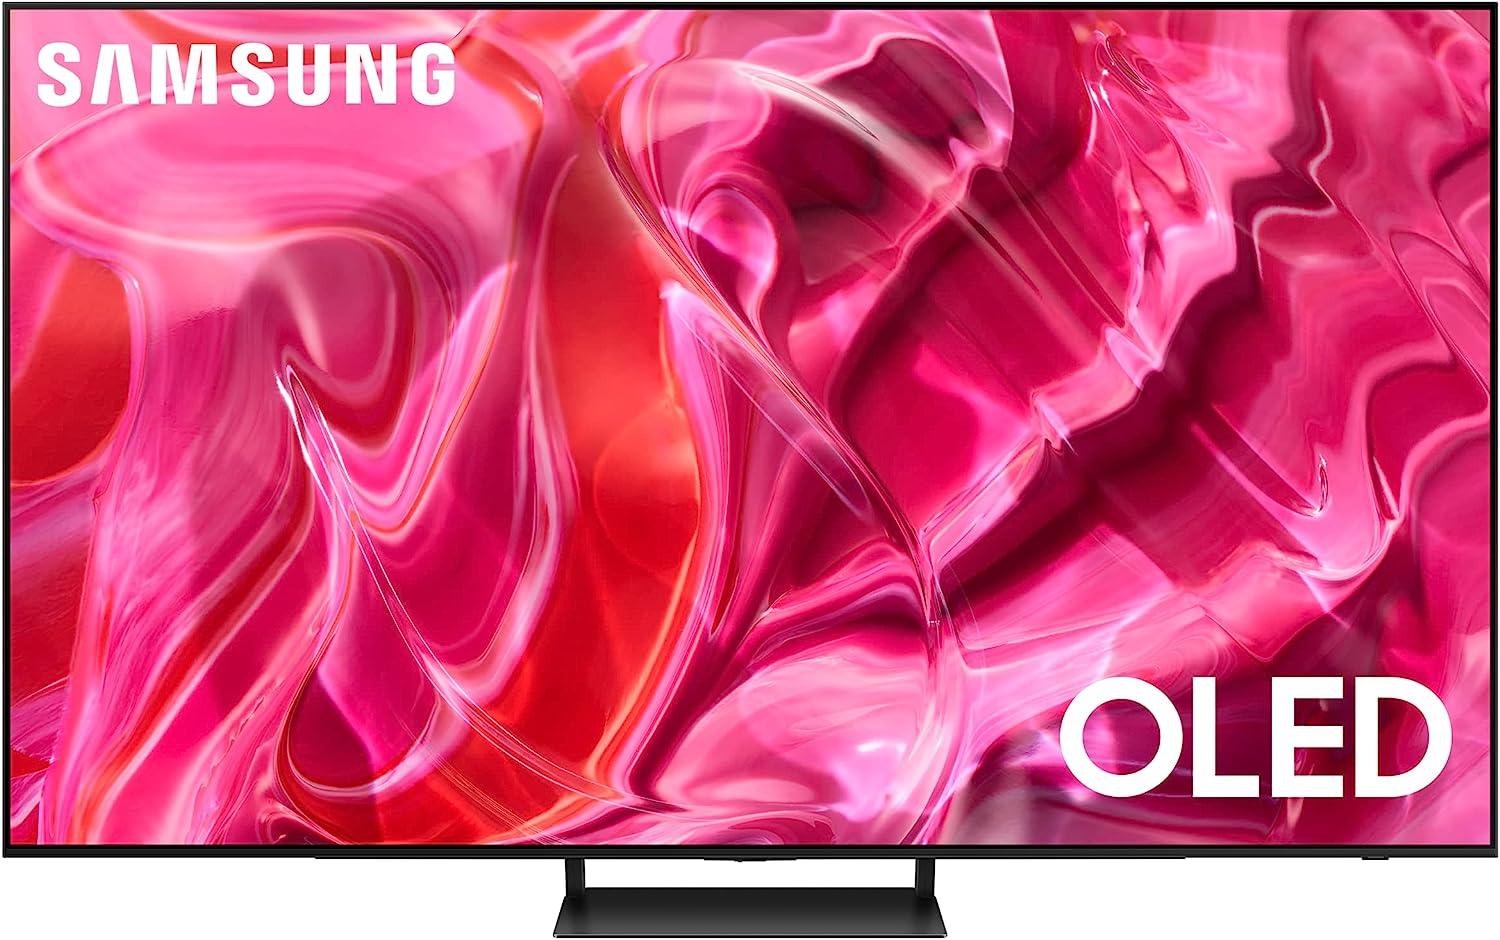 Frontal view of the Samsung - 65" Class S90C OLED Smart Tizen TV.